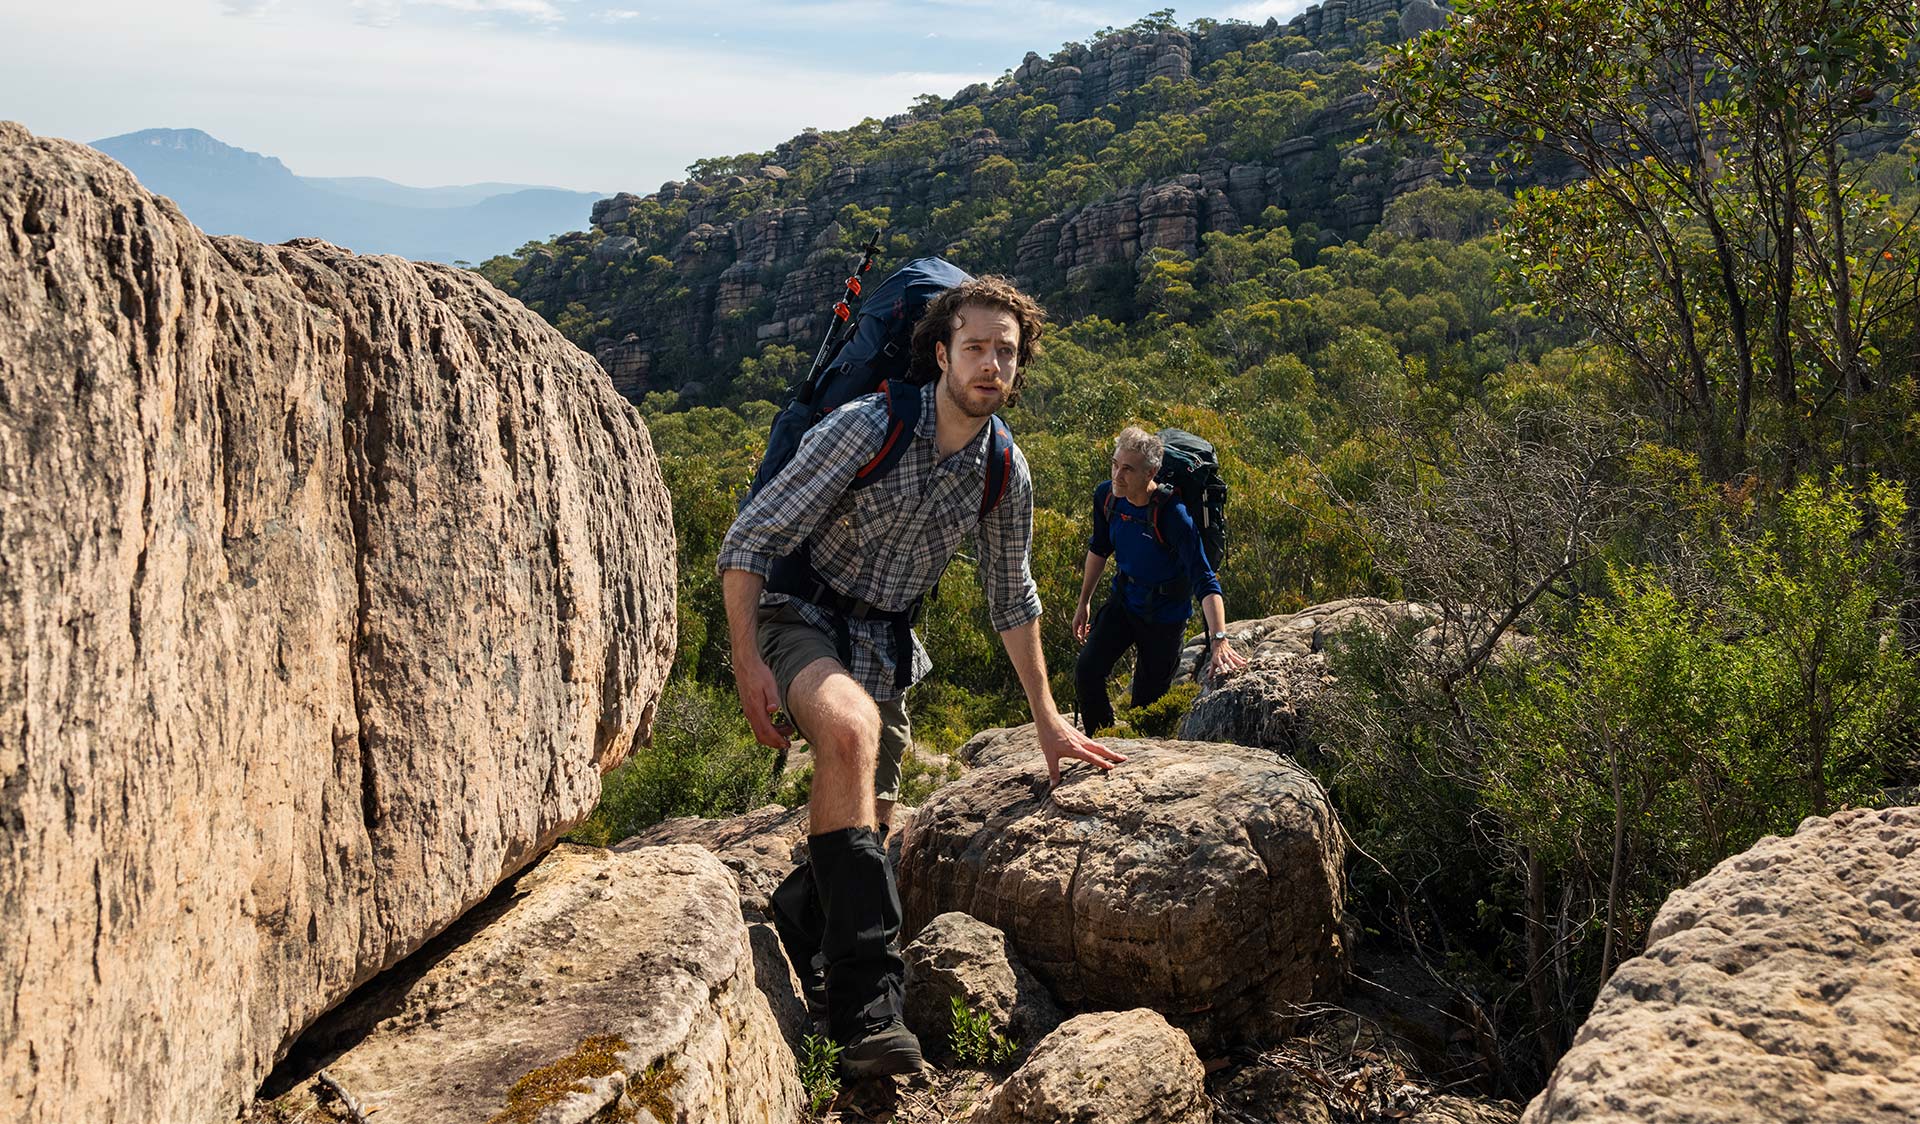 Two hikers wearing hiking bags climb a rocky track